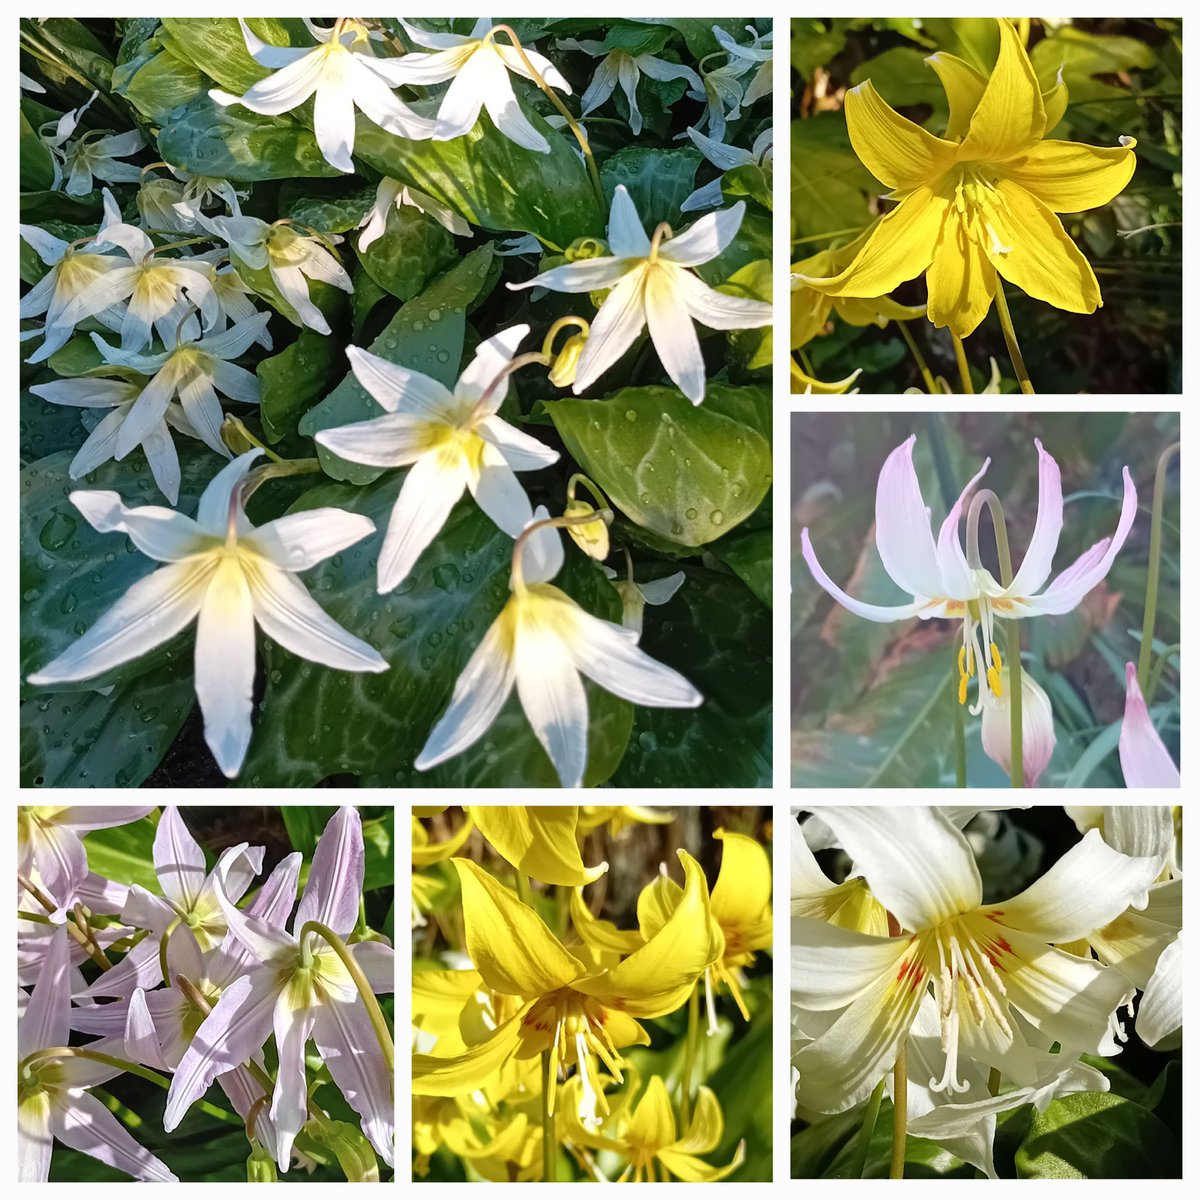 Good morning gardening Tweeps. It's all about the erythroniums in my #SixOnSaturday this week. It's peak season with white pink and yellow varieties all in flower.